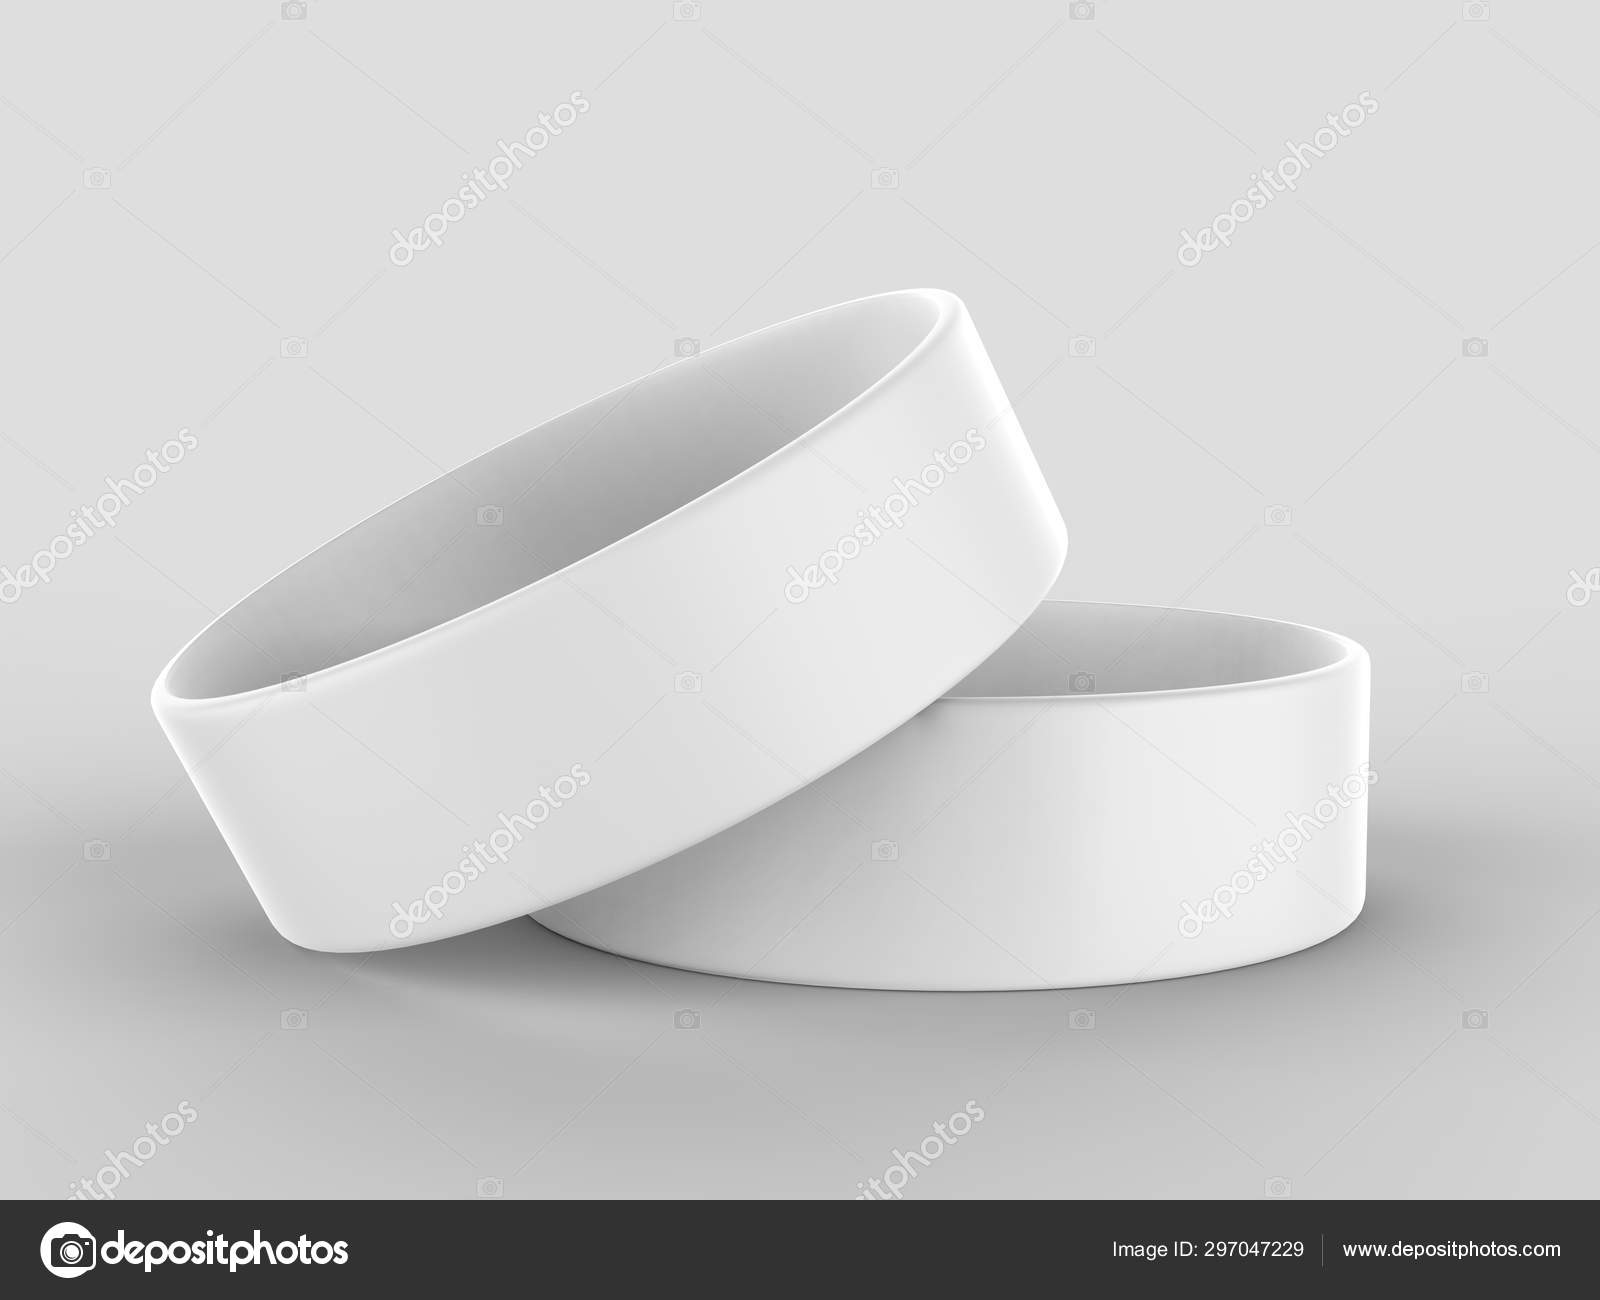 Download Blank Silicone Wristband Rubber Bracelet Party Favor Mockup Design Render Stock Photo Image By C Godesign99 297047229